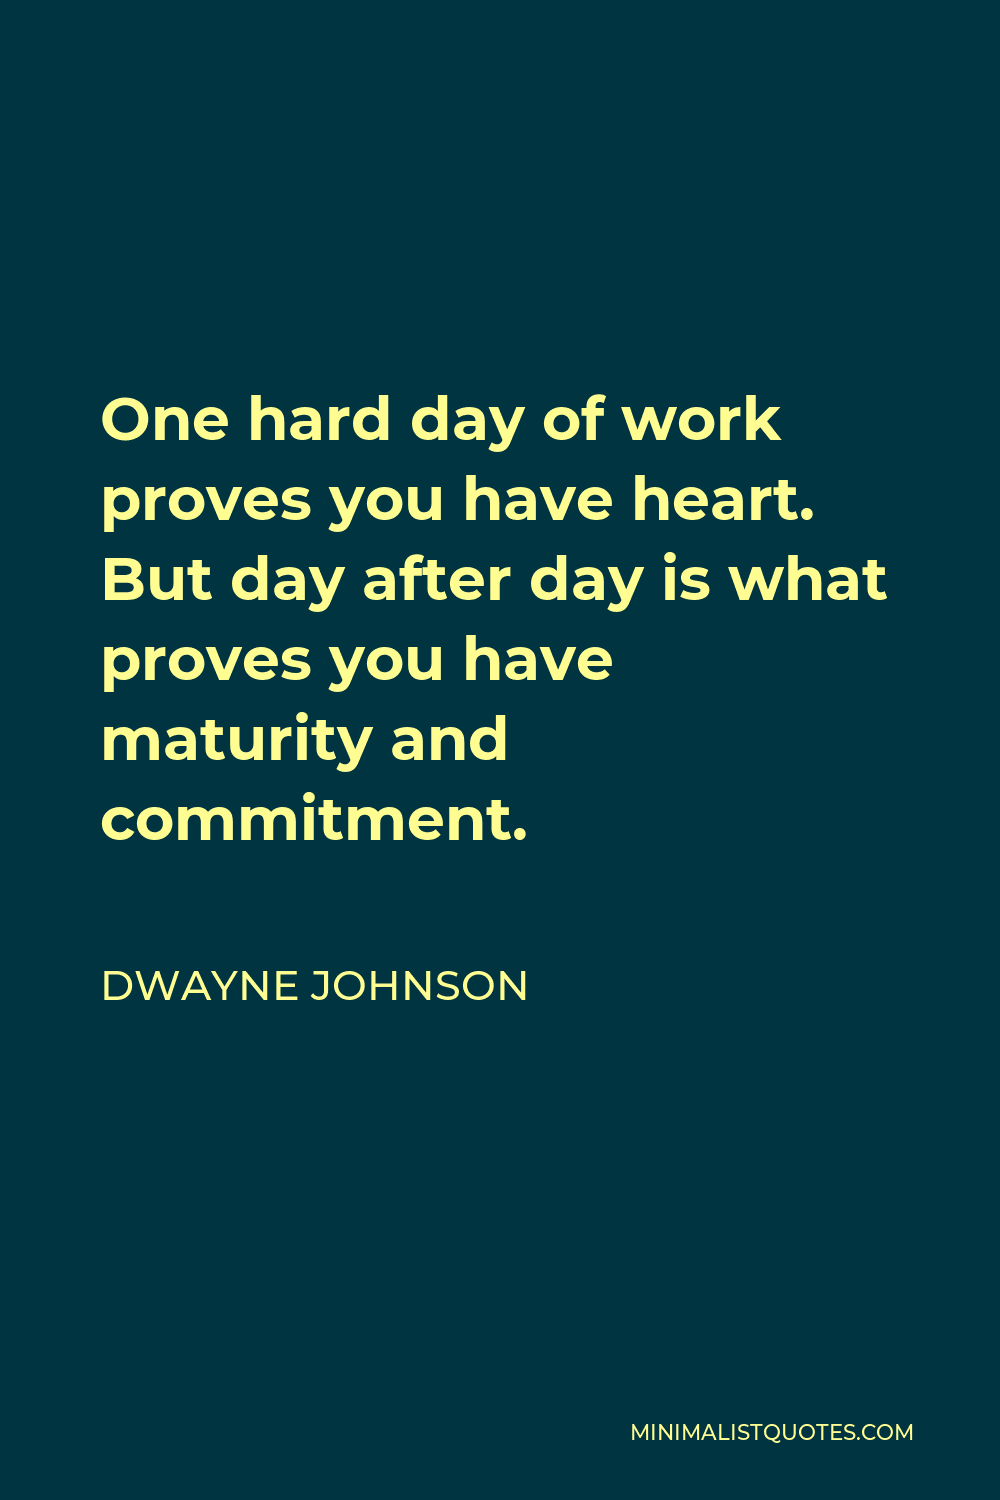 Dwayne Johnson Quote - One hard day of work proves you have heart. But day after day is what proves you have maturity and commitment.